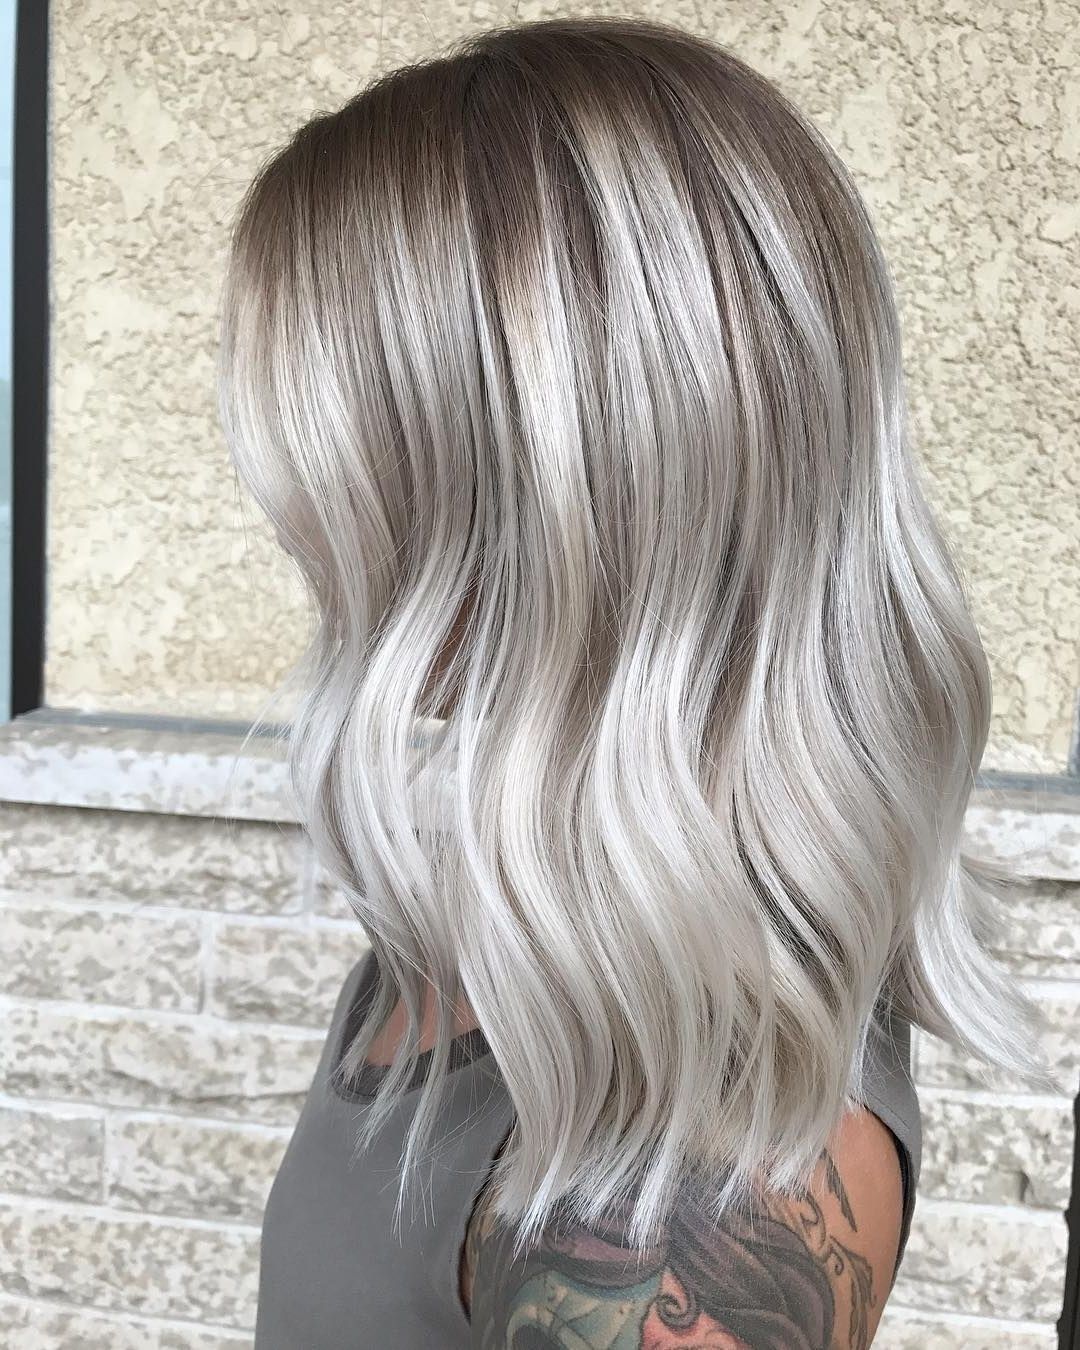 Best And Newest Dark Brown Hair Hairstyles With Silver Blonde Highlights Regarding 10 Ash Blonde Hairstyles For All Skin Tones, 2018 Best Hair Color Trends (View 20 of 20)